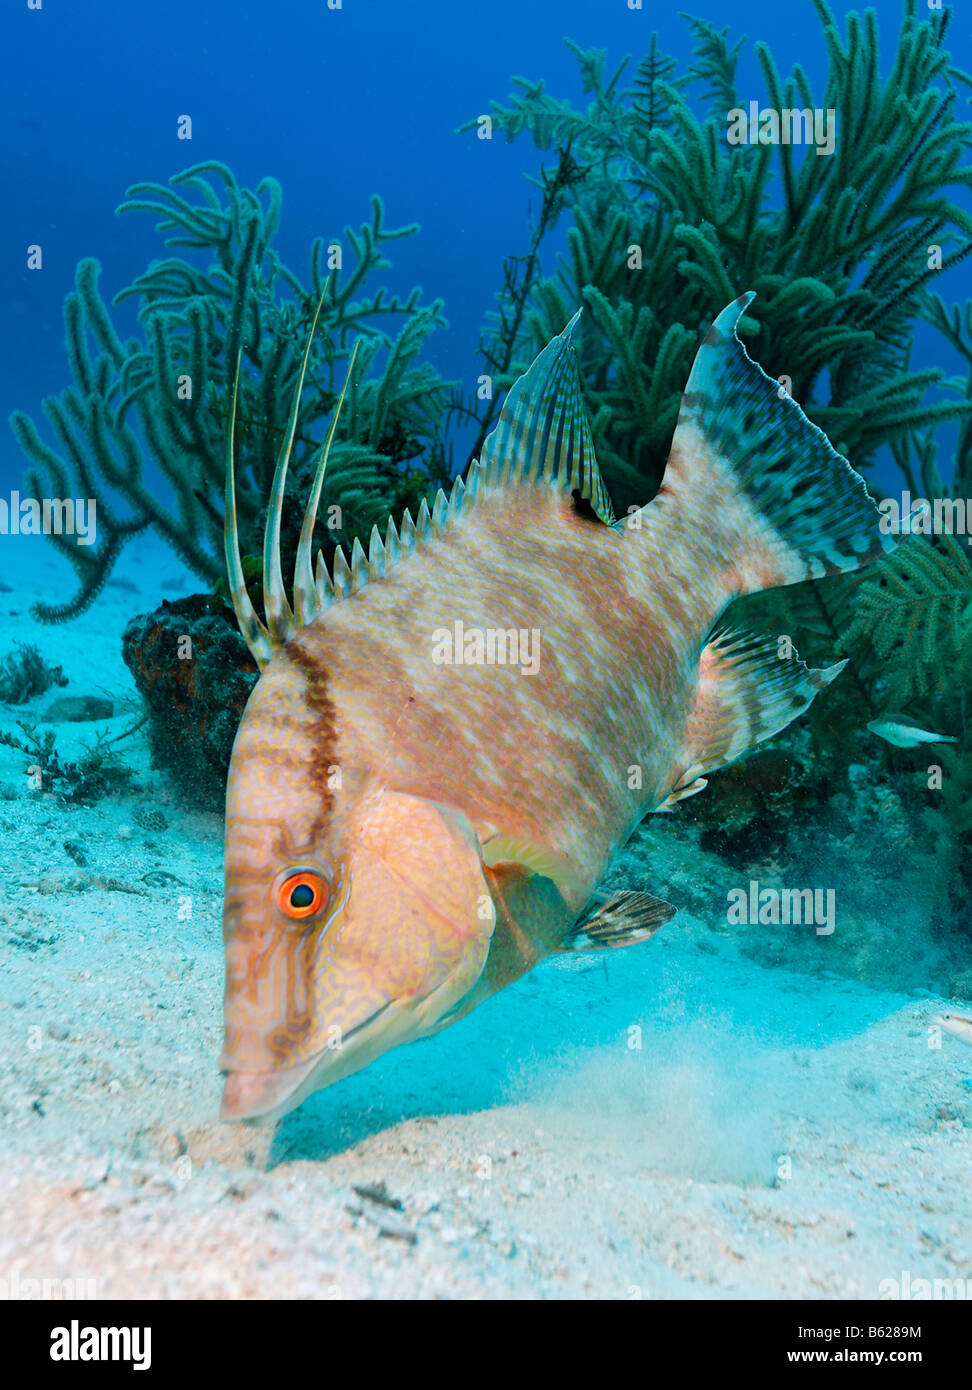 Hogfish (Lachnolaimus maximus) searching in the sandy seabed for food, Hopkins, Dangria, Belize, Central America, Caribbean Stock Photo